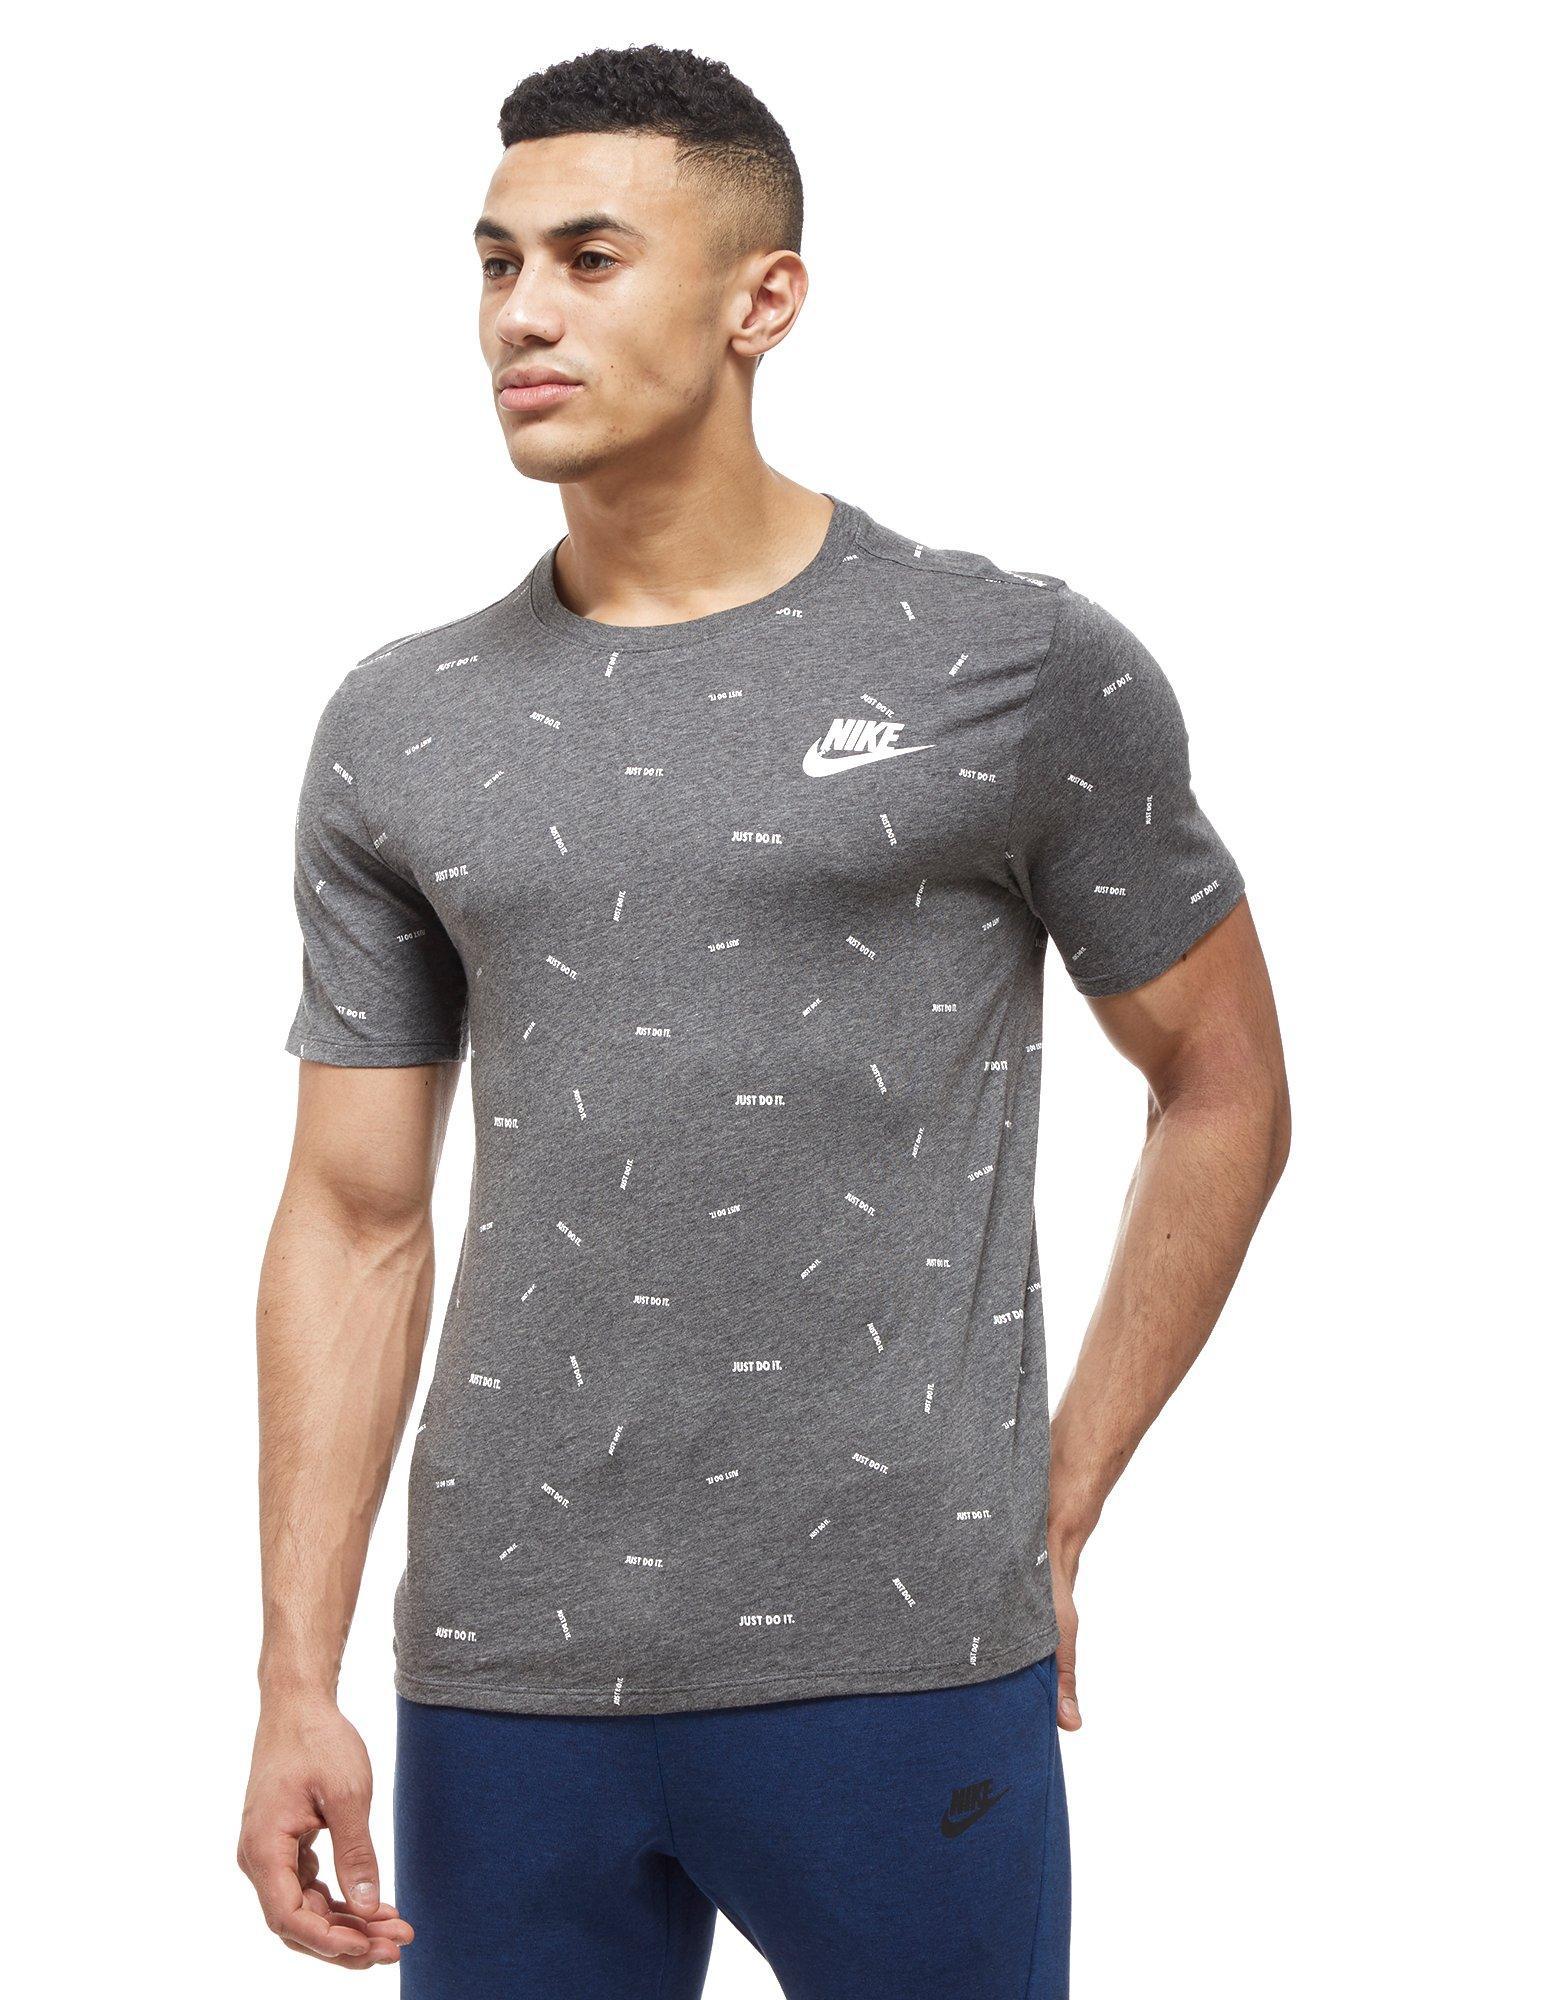 jd sports t shirts All products are discounted, Cheaper Than Retail Price,  Free Delivery & Returns OFF 60%